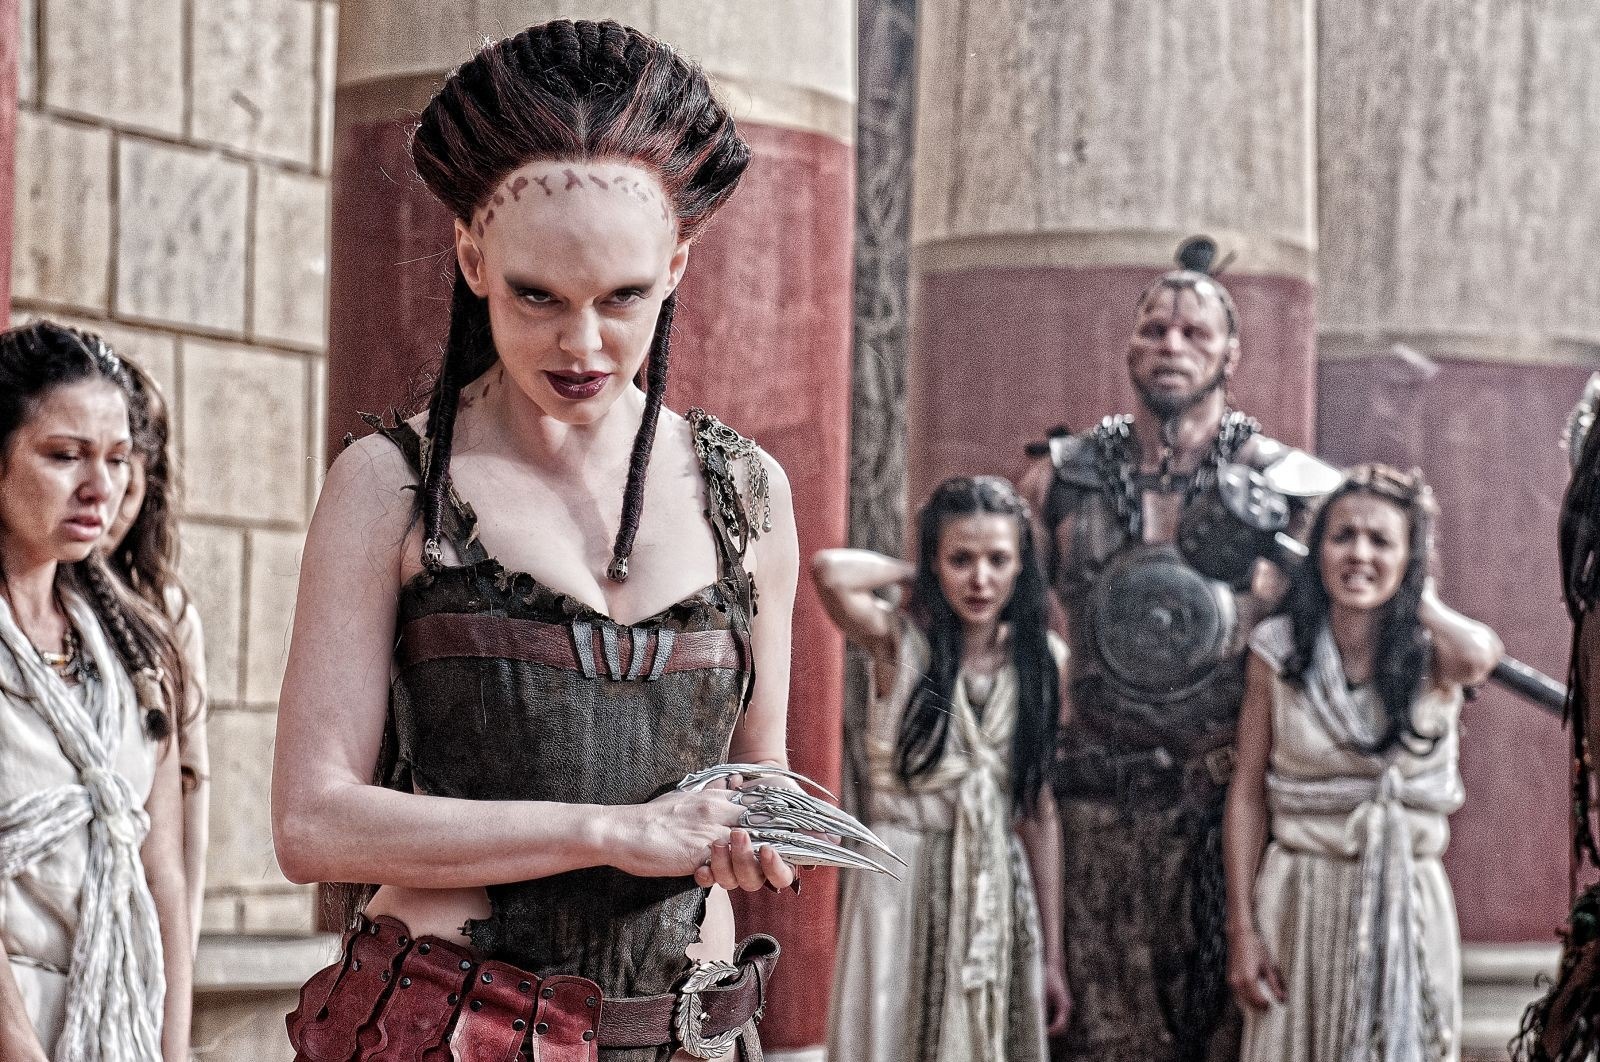 Rose McGowan stars as Marique in Lionsgate Films' Conan the Barbarian (2011). Photo credit by Simon Varsano.